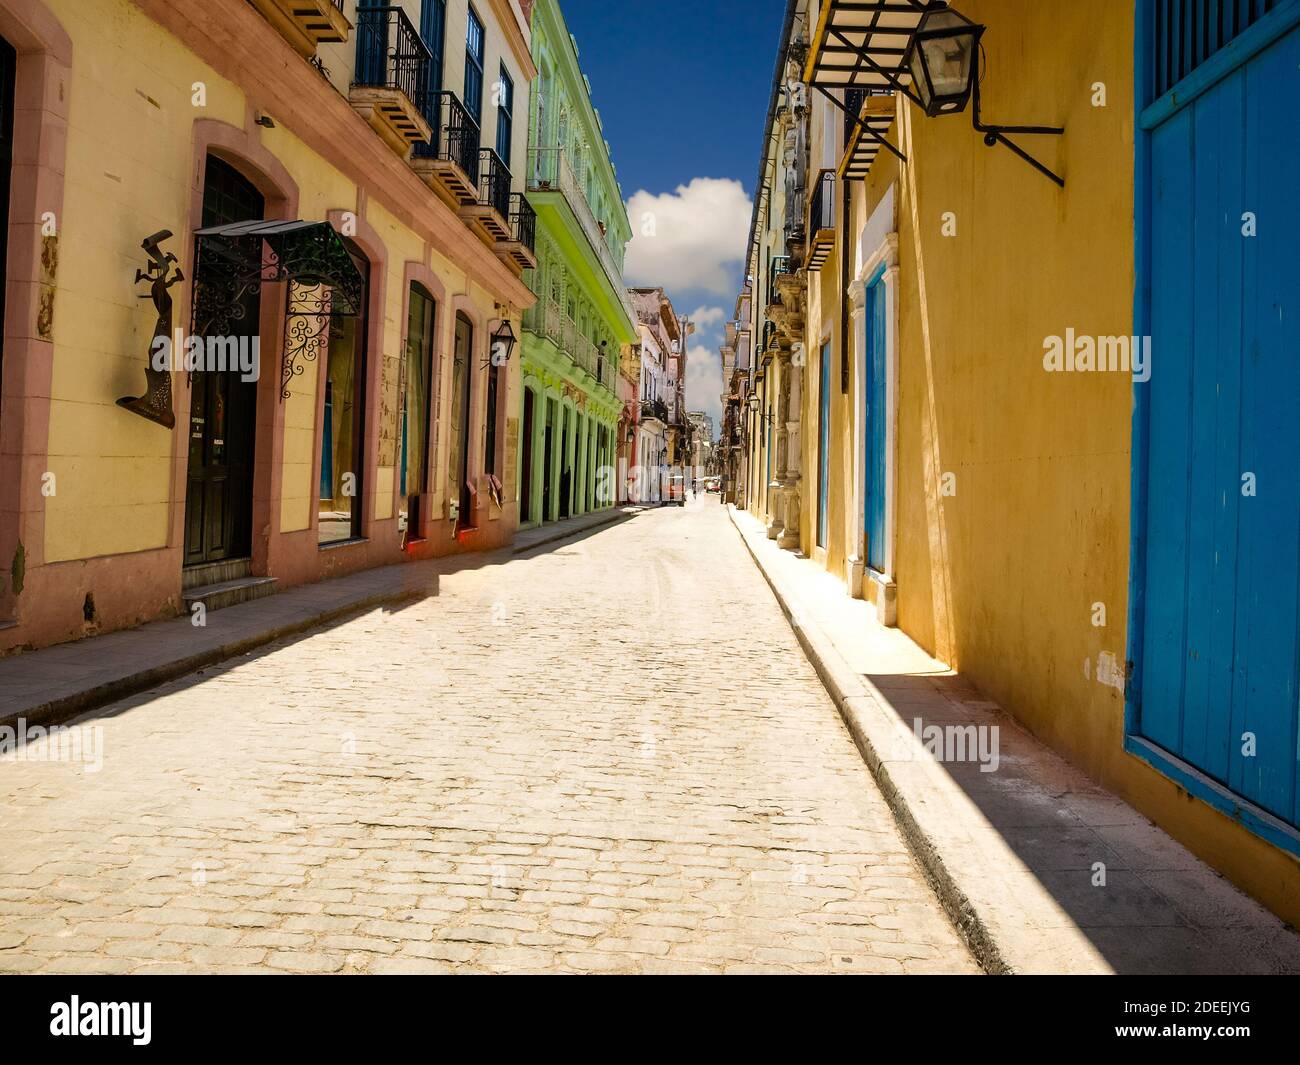 Where Hemmingway lived in Cuba. Cuban spring - Beautiful tropical landscape Stock Photo